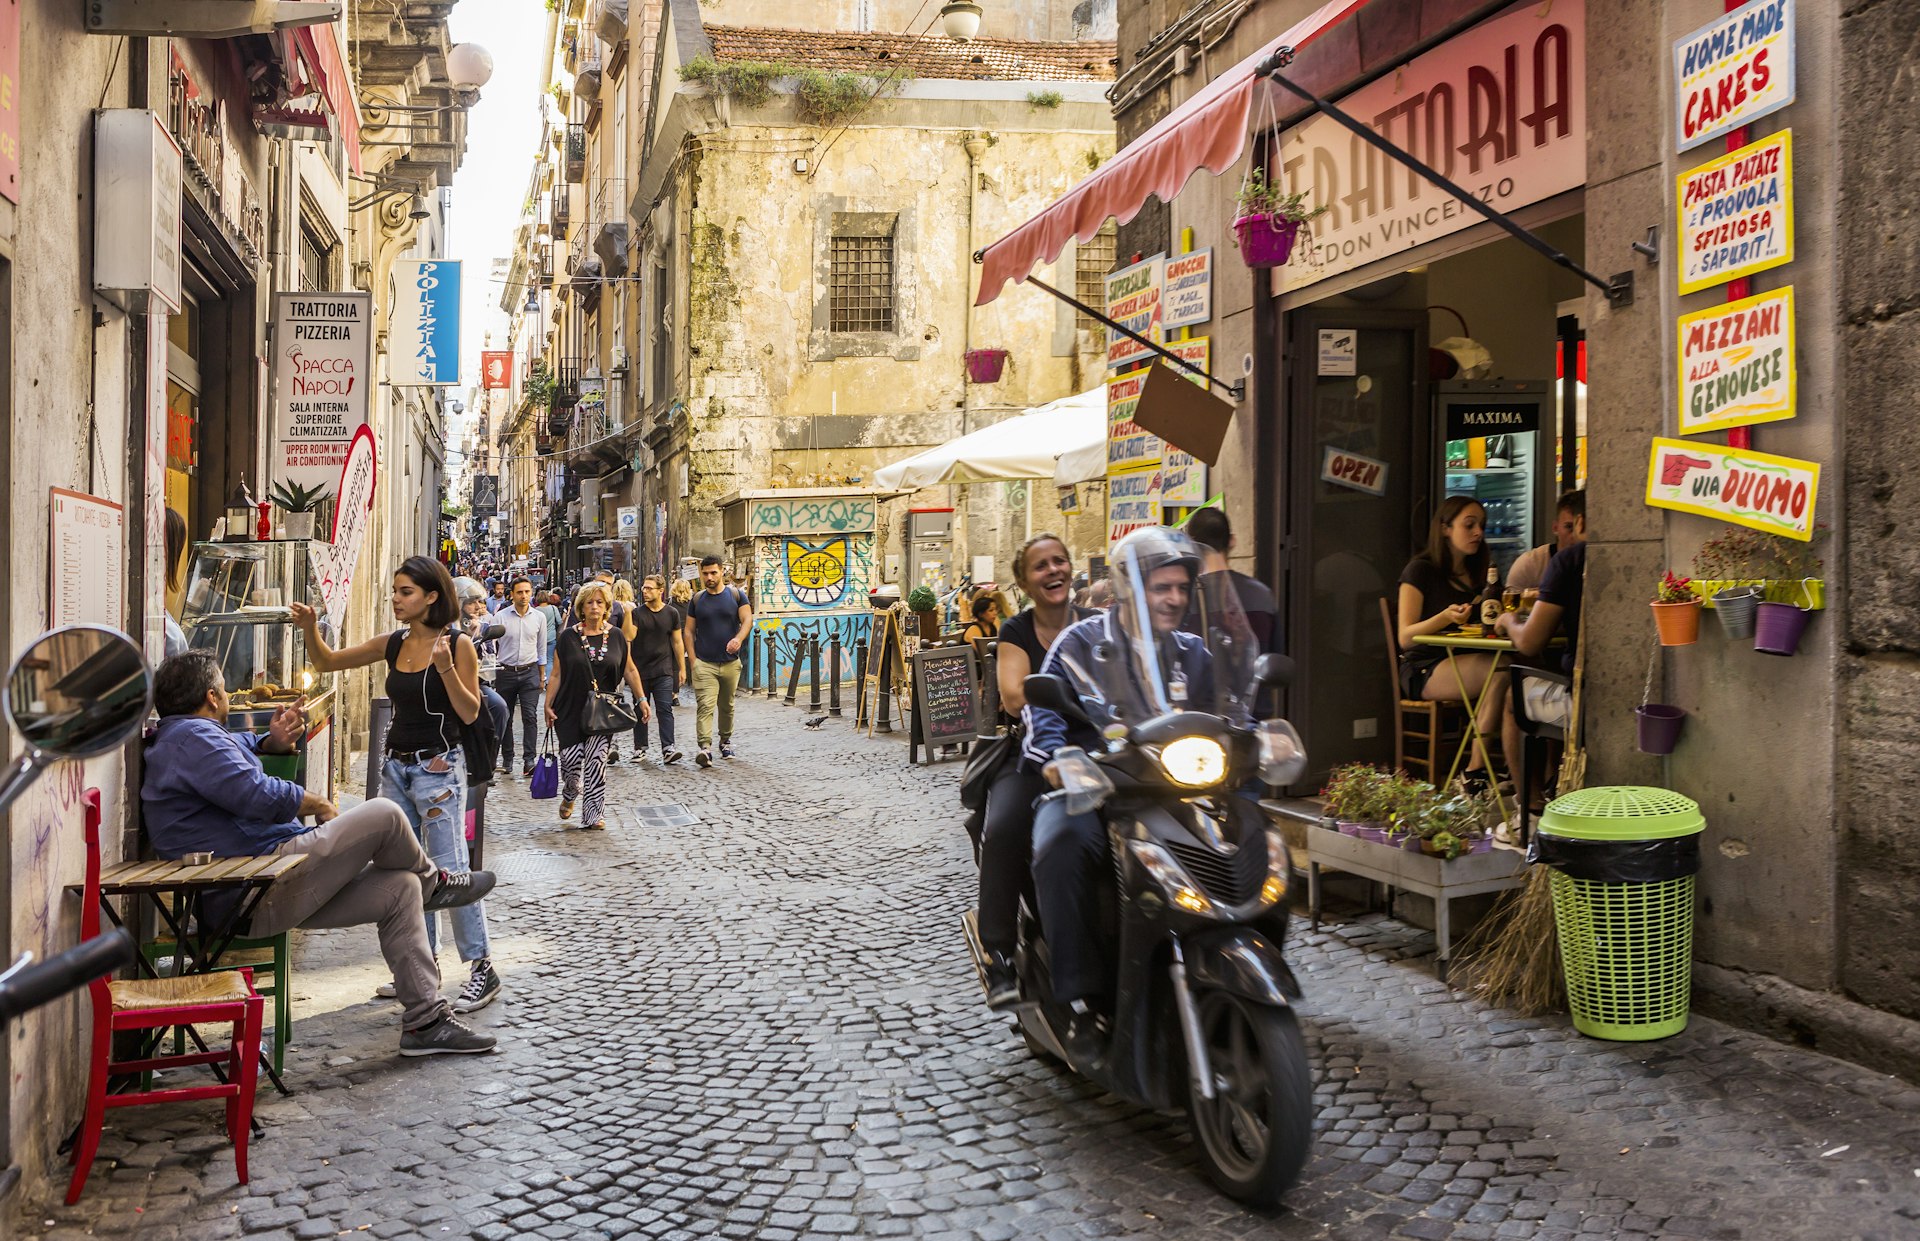 A busy street in Naples. The street is narrow and hemmed in by tall apartment buildings. A motorbike with two passengers drives down the street, while people dine in cafes with tables spilling onto the pavements.